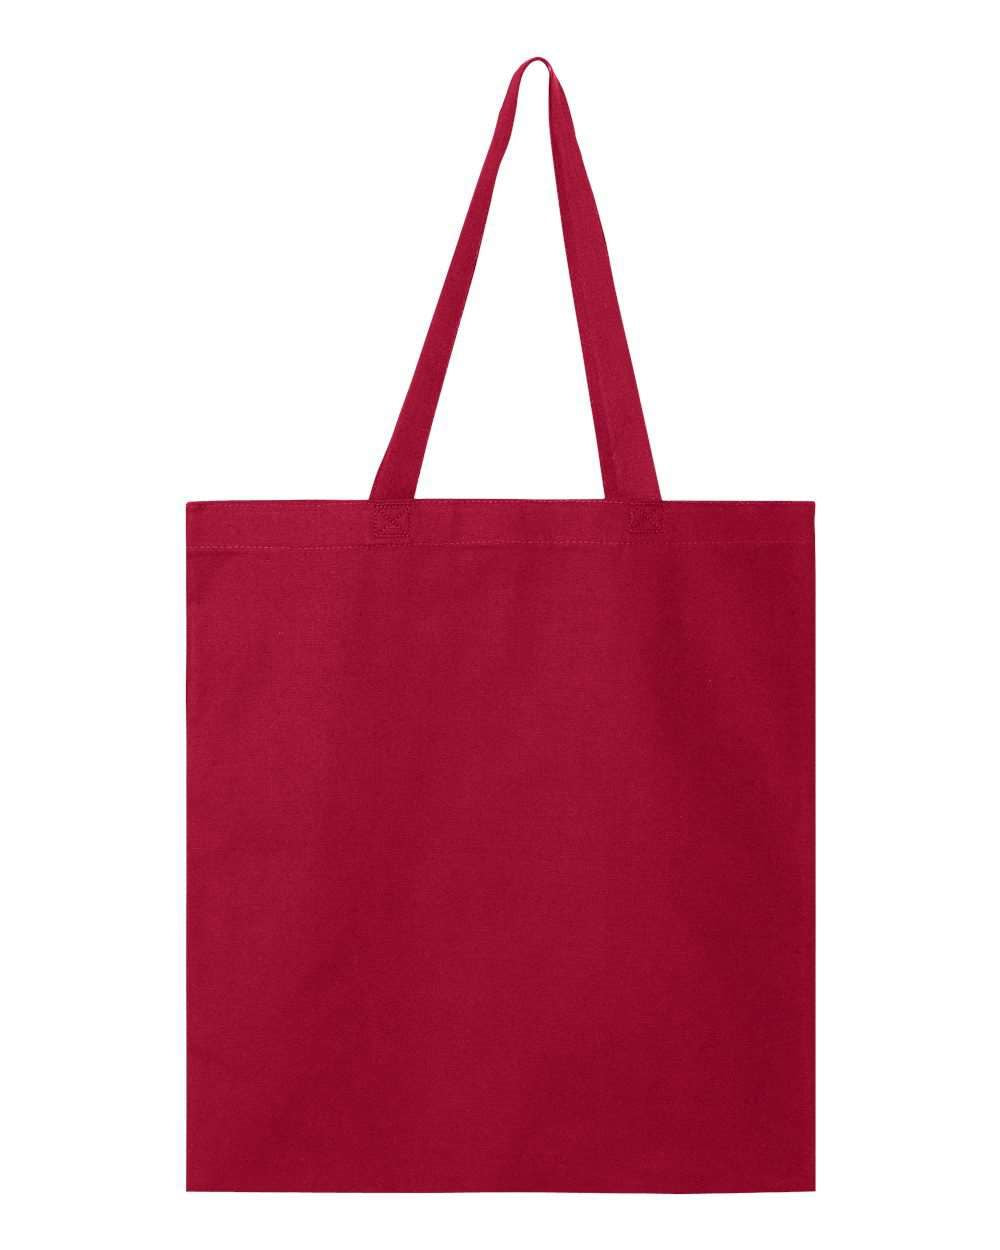 Q-Tees Promotional Tote Q800 Q-Tees Promotional Tote Q800